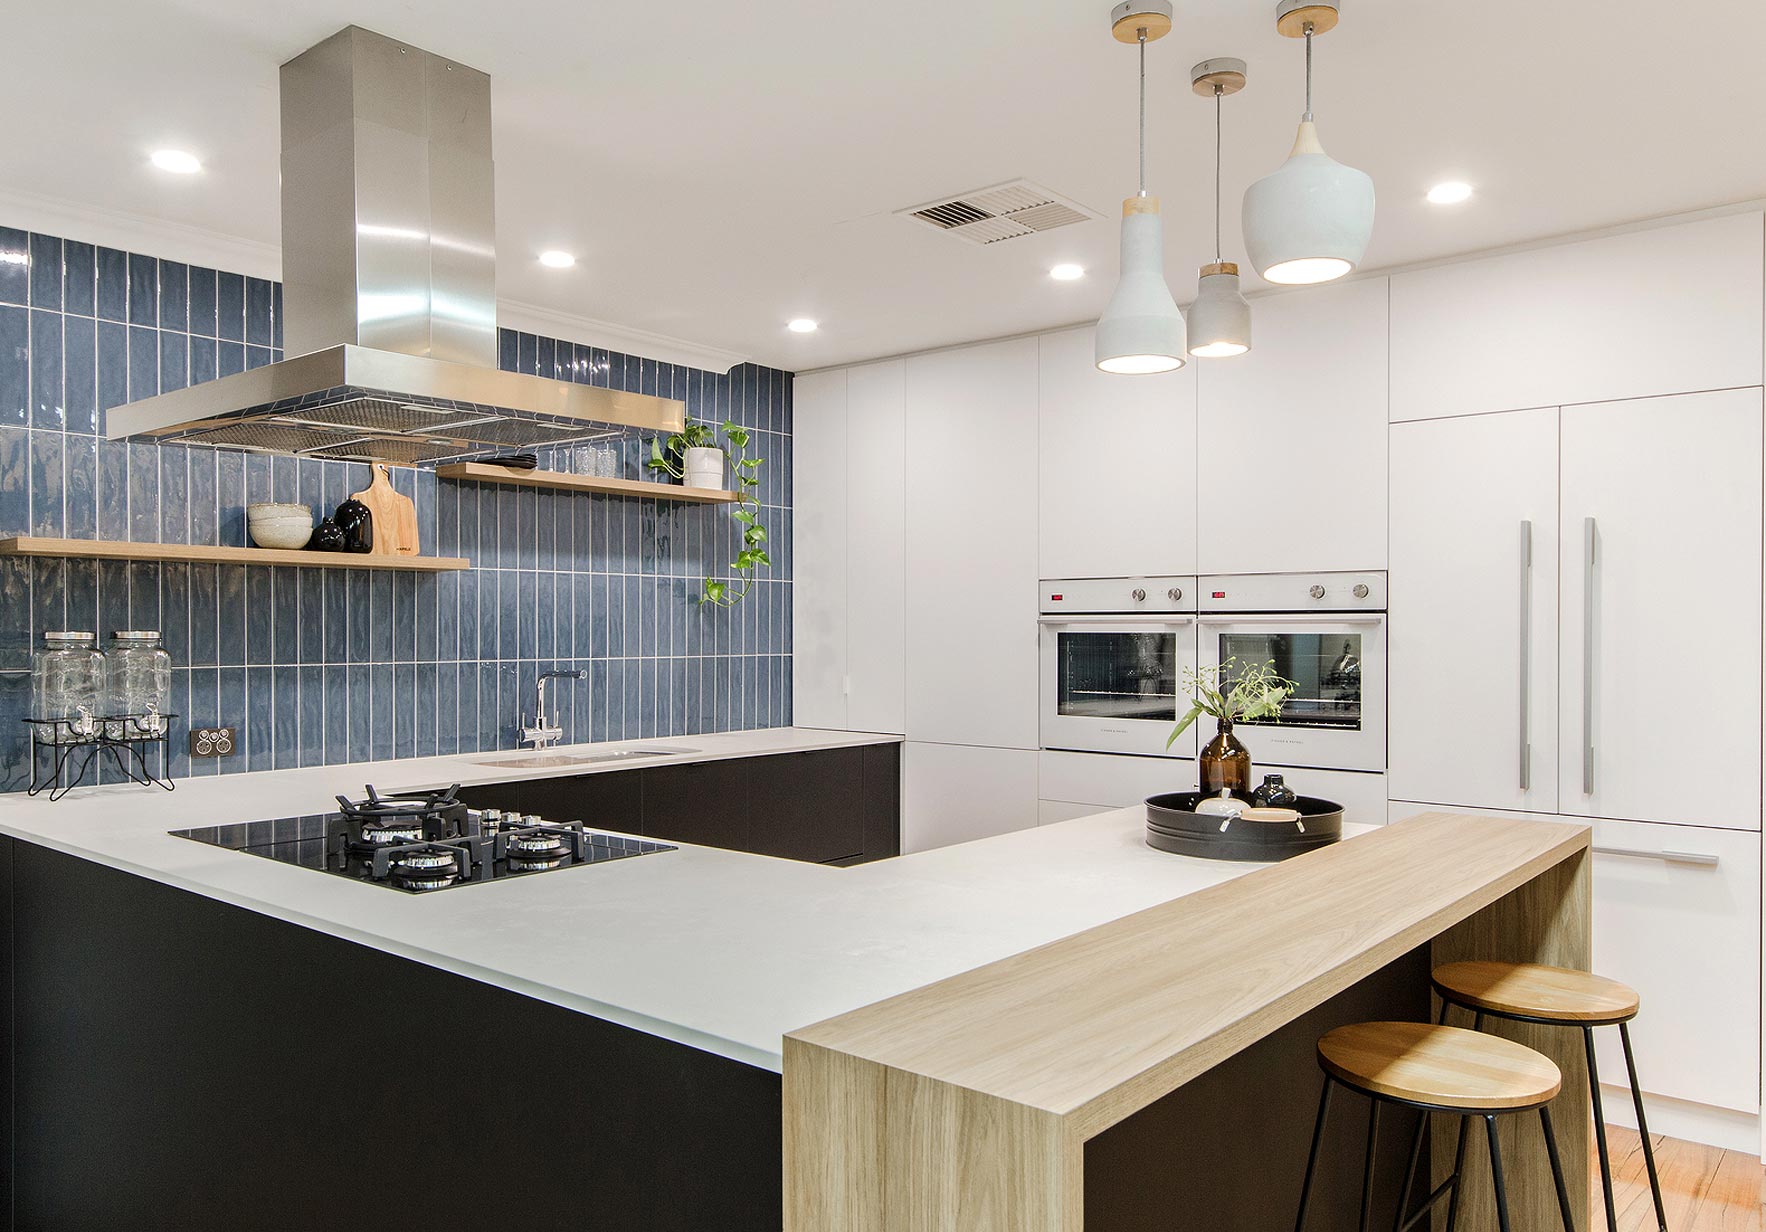  diving into the myriad of choices involved in kitchen design